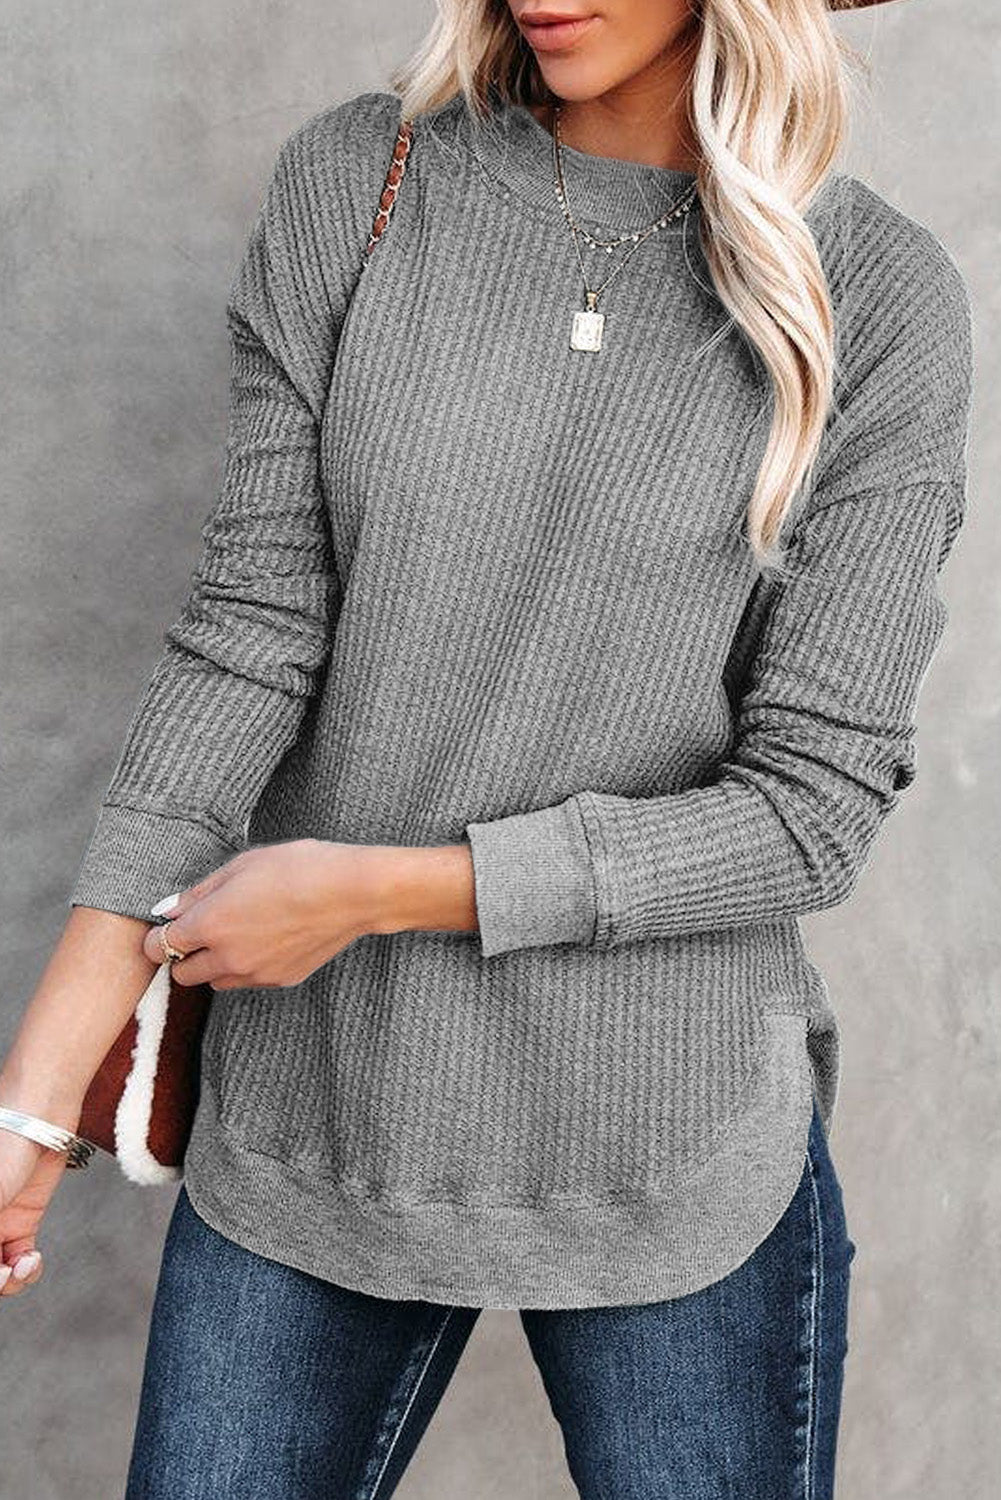 Gray Crew Neck Ribbed Trim Waffle Knit Top Gray 62.7%Polyester+37.3%Cotton Long Sleeve Tops JT's Designer Fashion